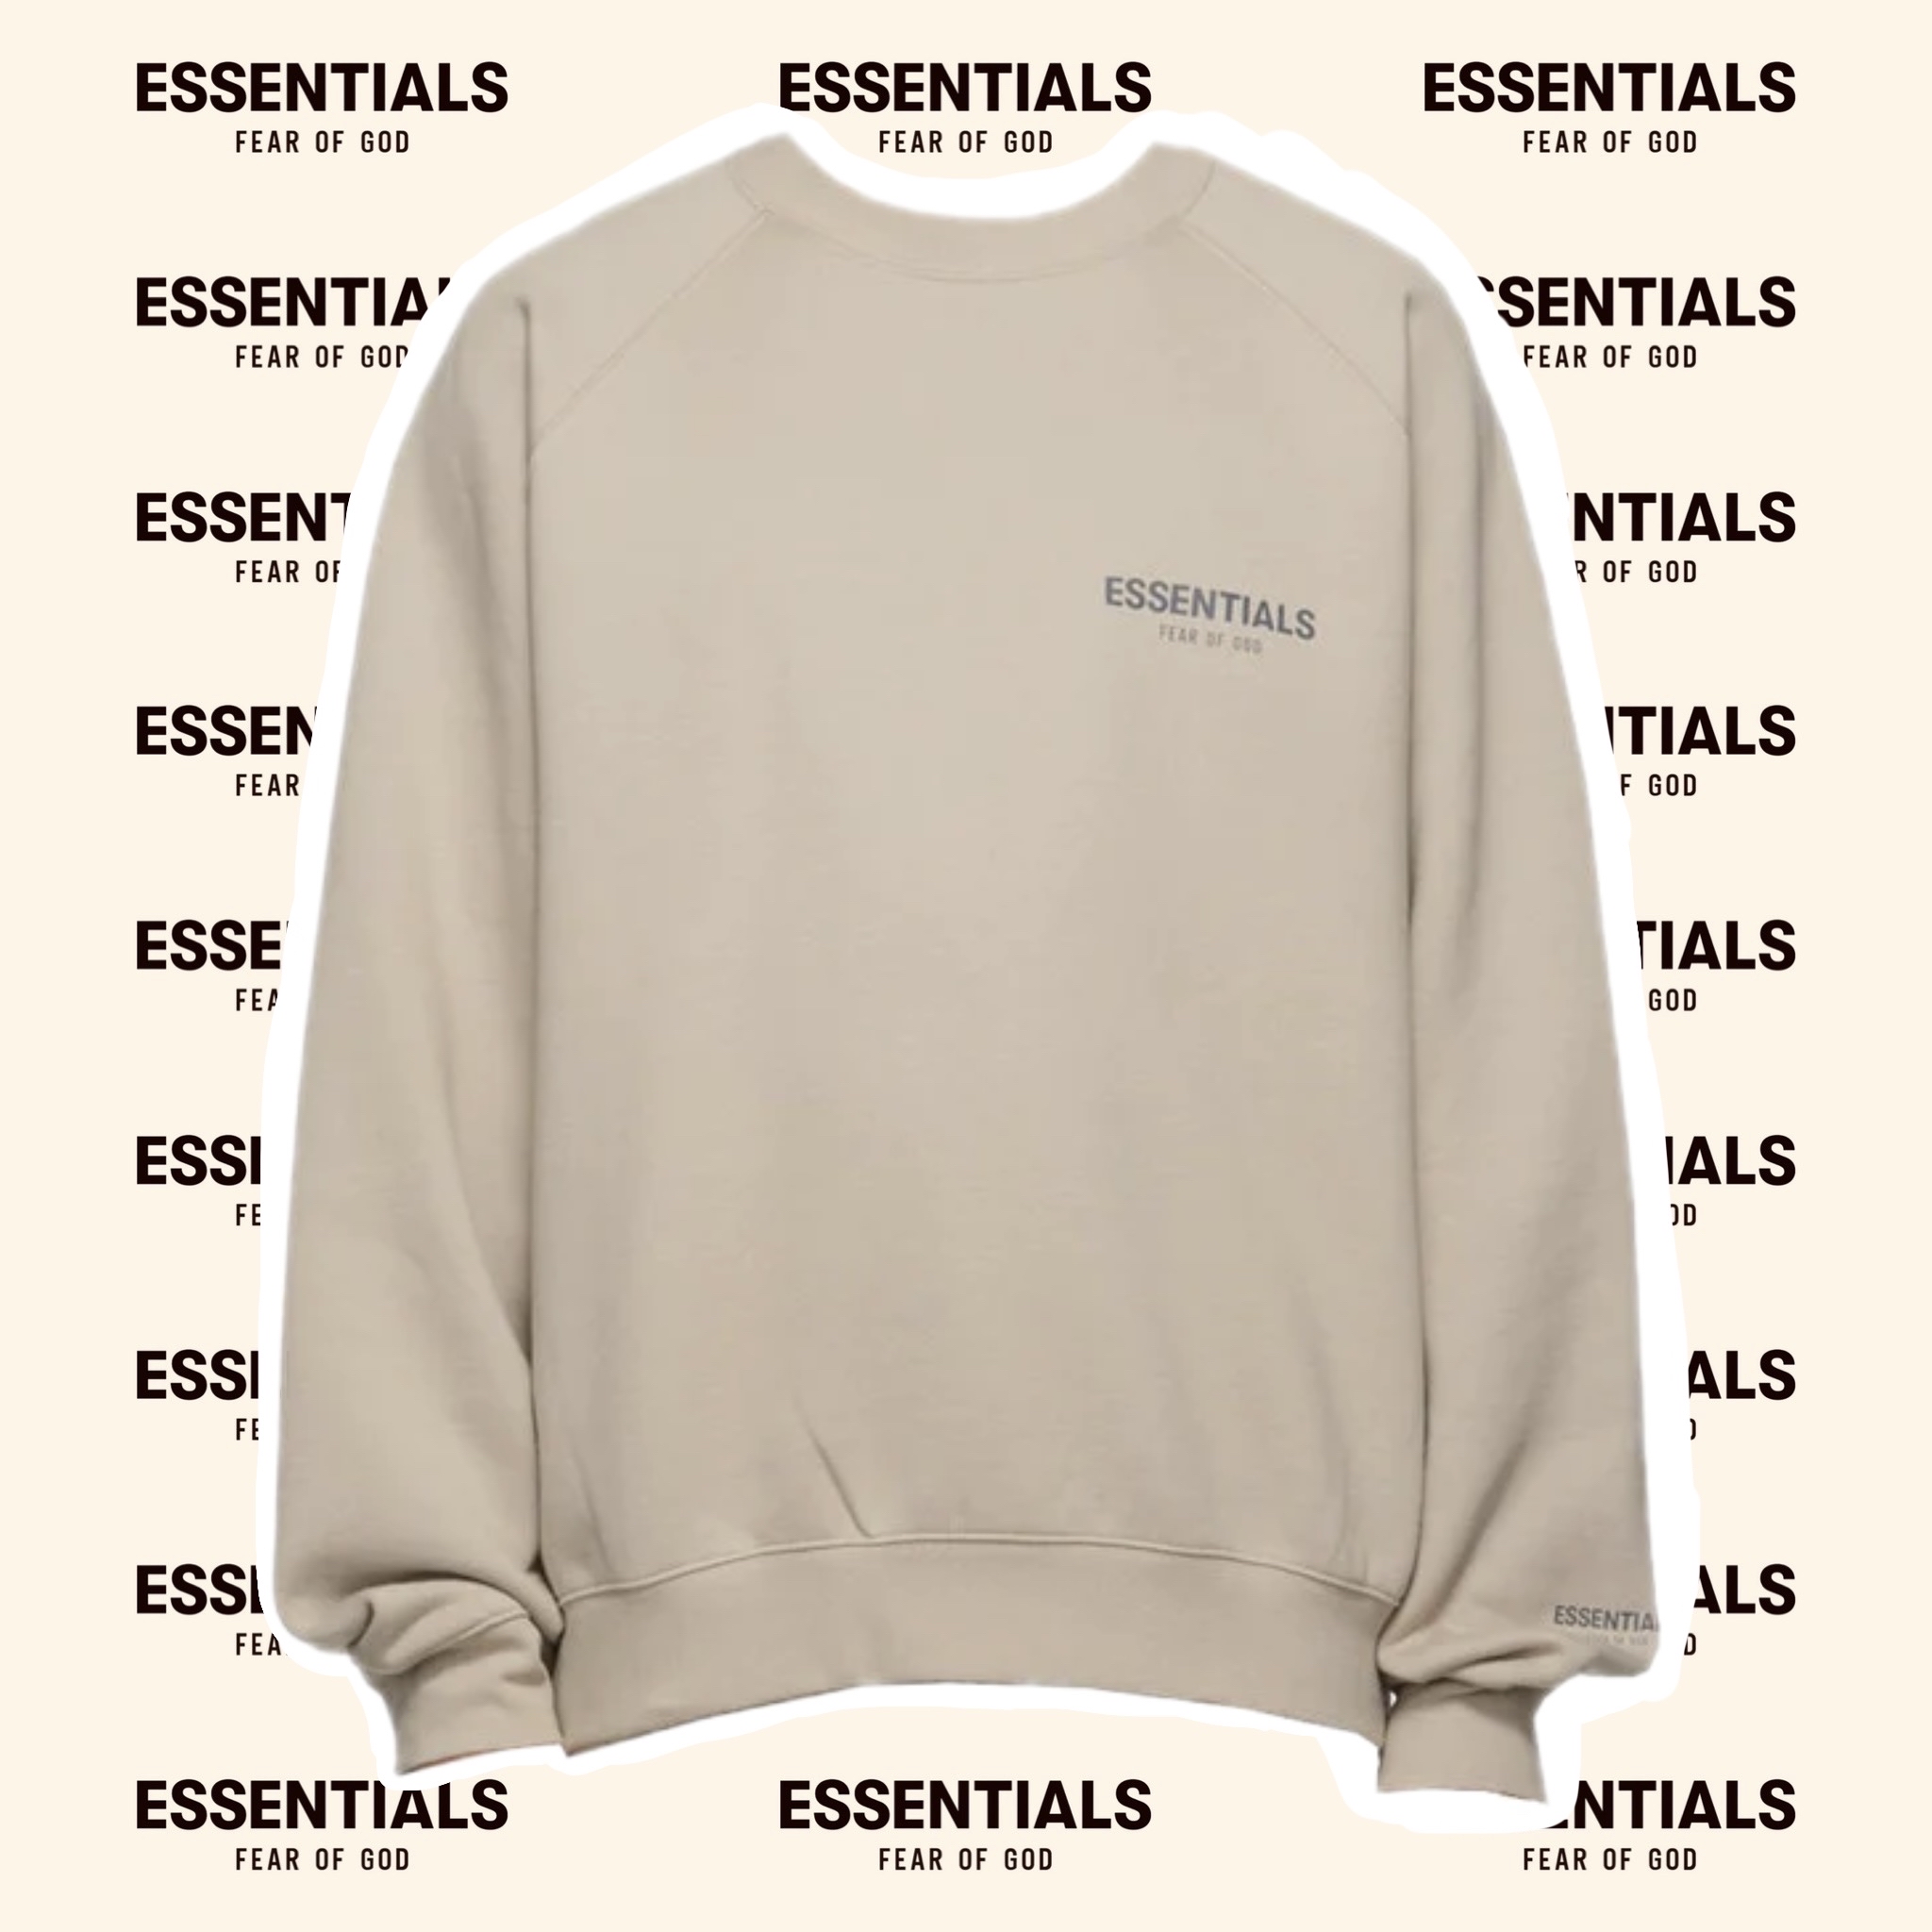 FEAR OF GOD ESSENTIALS 22FW CORE COLLECTION CREWNECK | HYPETRADE